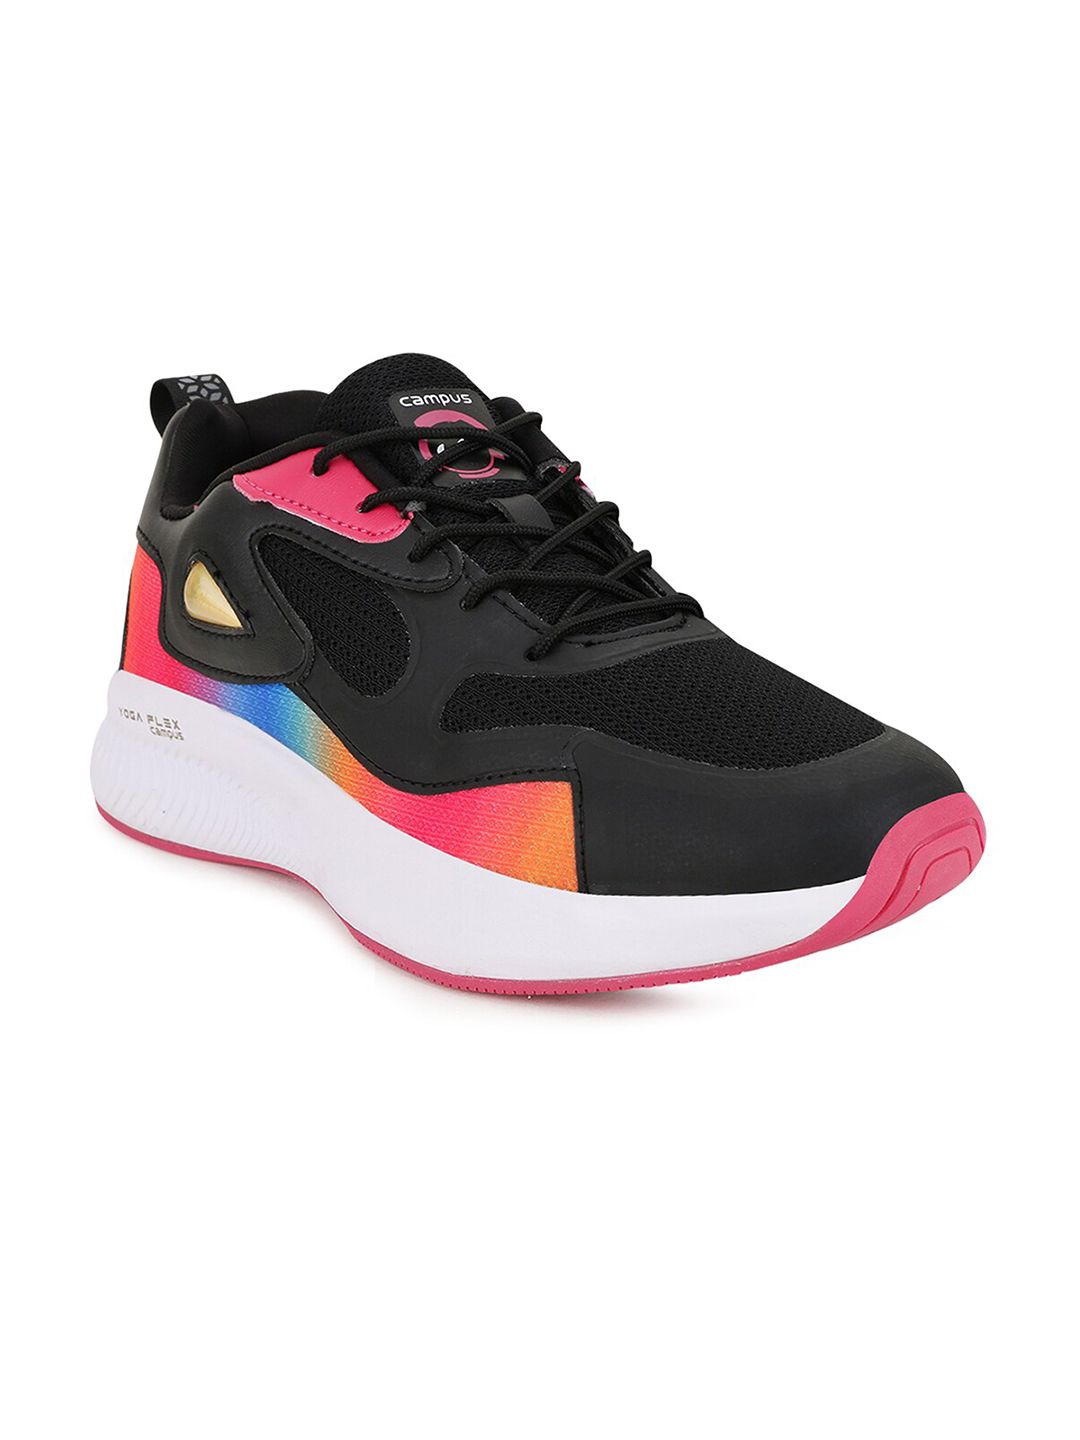 Campus Women Black & Pink Running Shoes Price in India